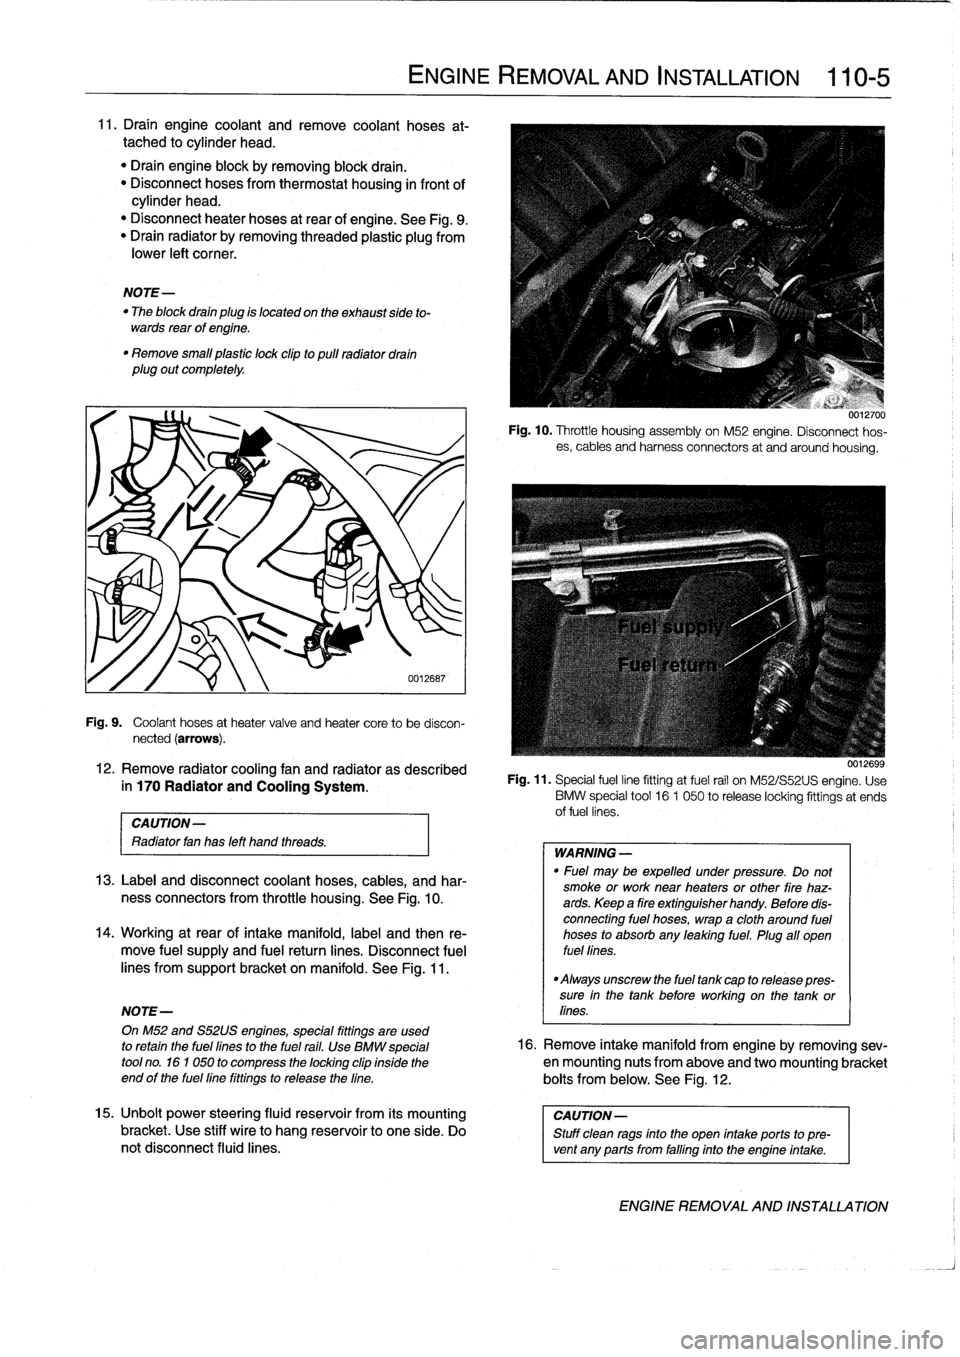 BMW 318i 1997 E36 Workshop Manual 
11
.
Draín
engine
coolant
and
Rmove
coolant
hoses
at-
tached
to
cylinder
head
.

"
Drain
engine
block
byremoving
block
drain
.
"
Disconnect
hoses
from
thermostat
housing
in
front
of
cylinder
head
.
